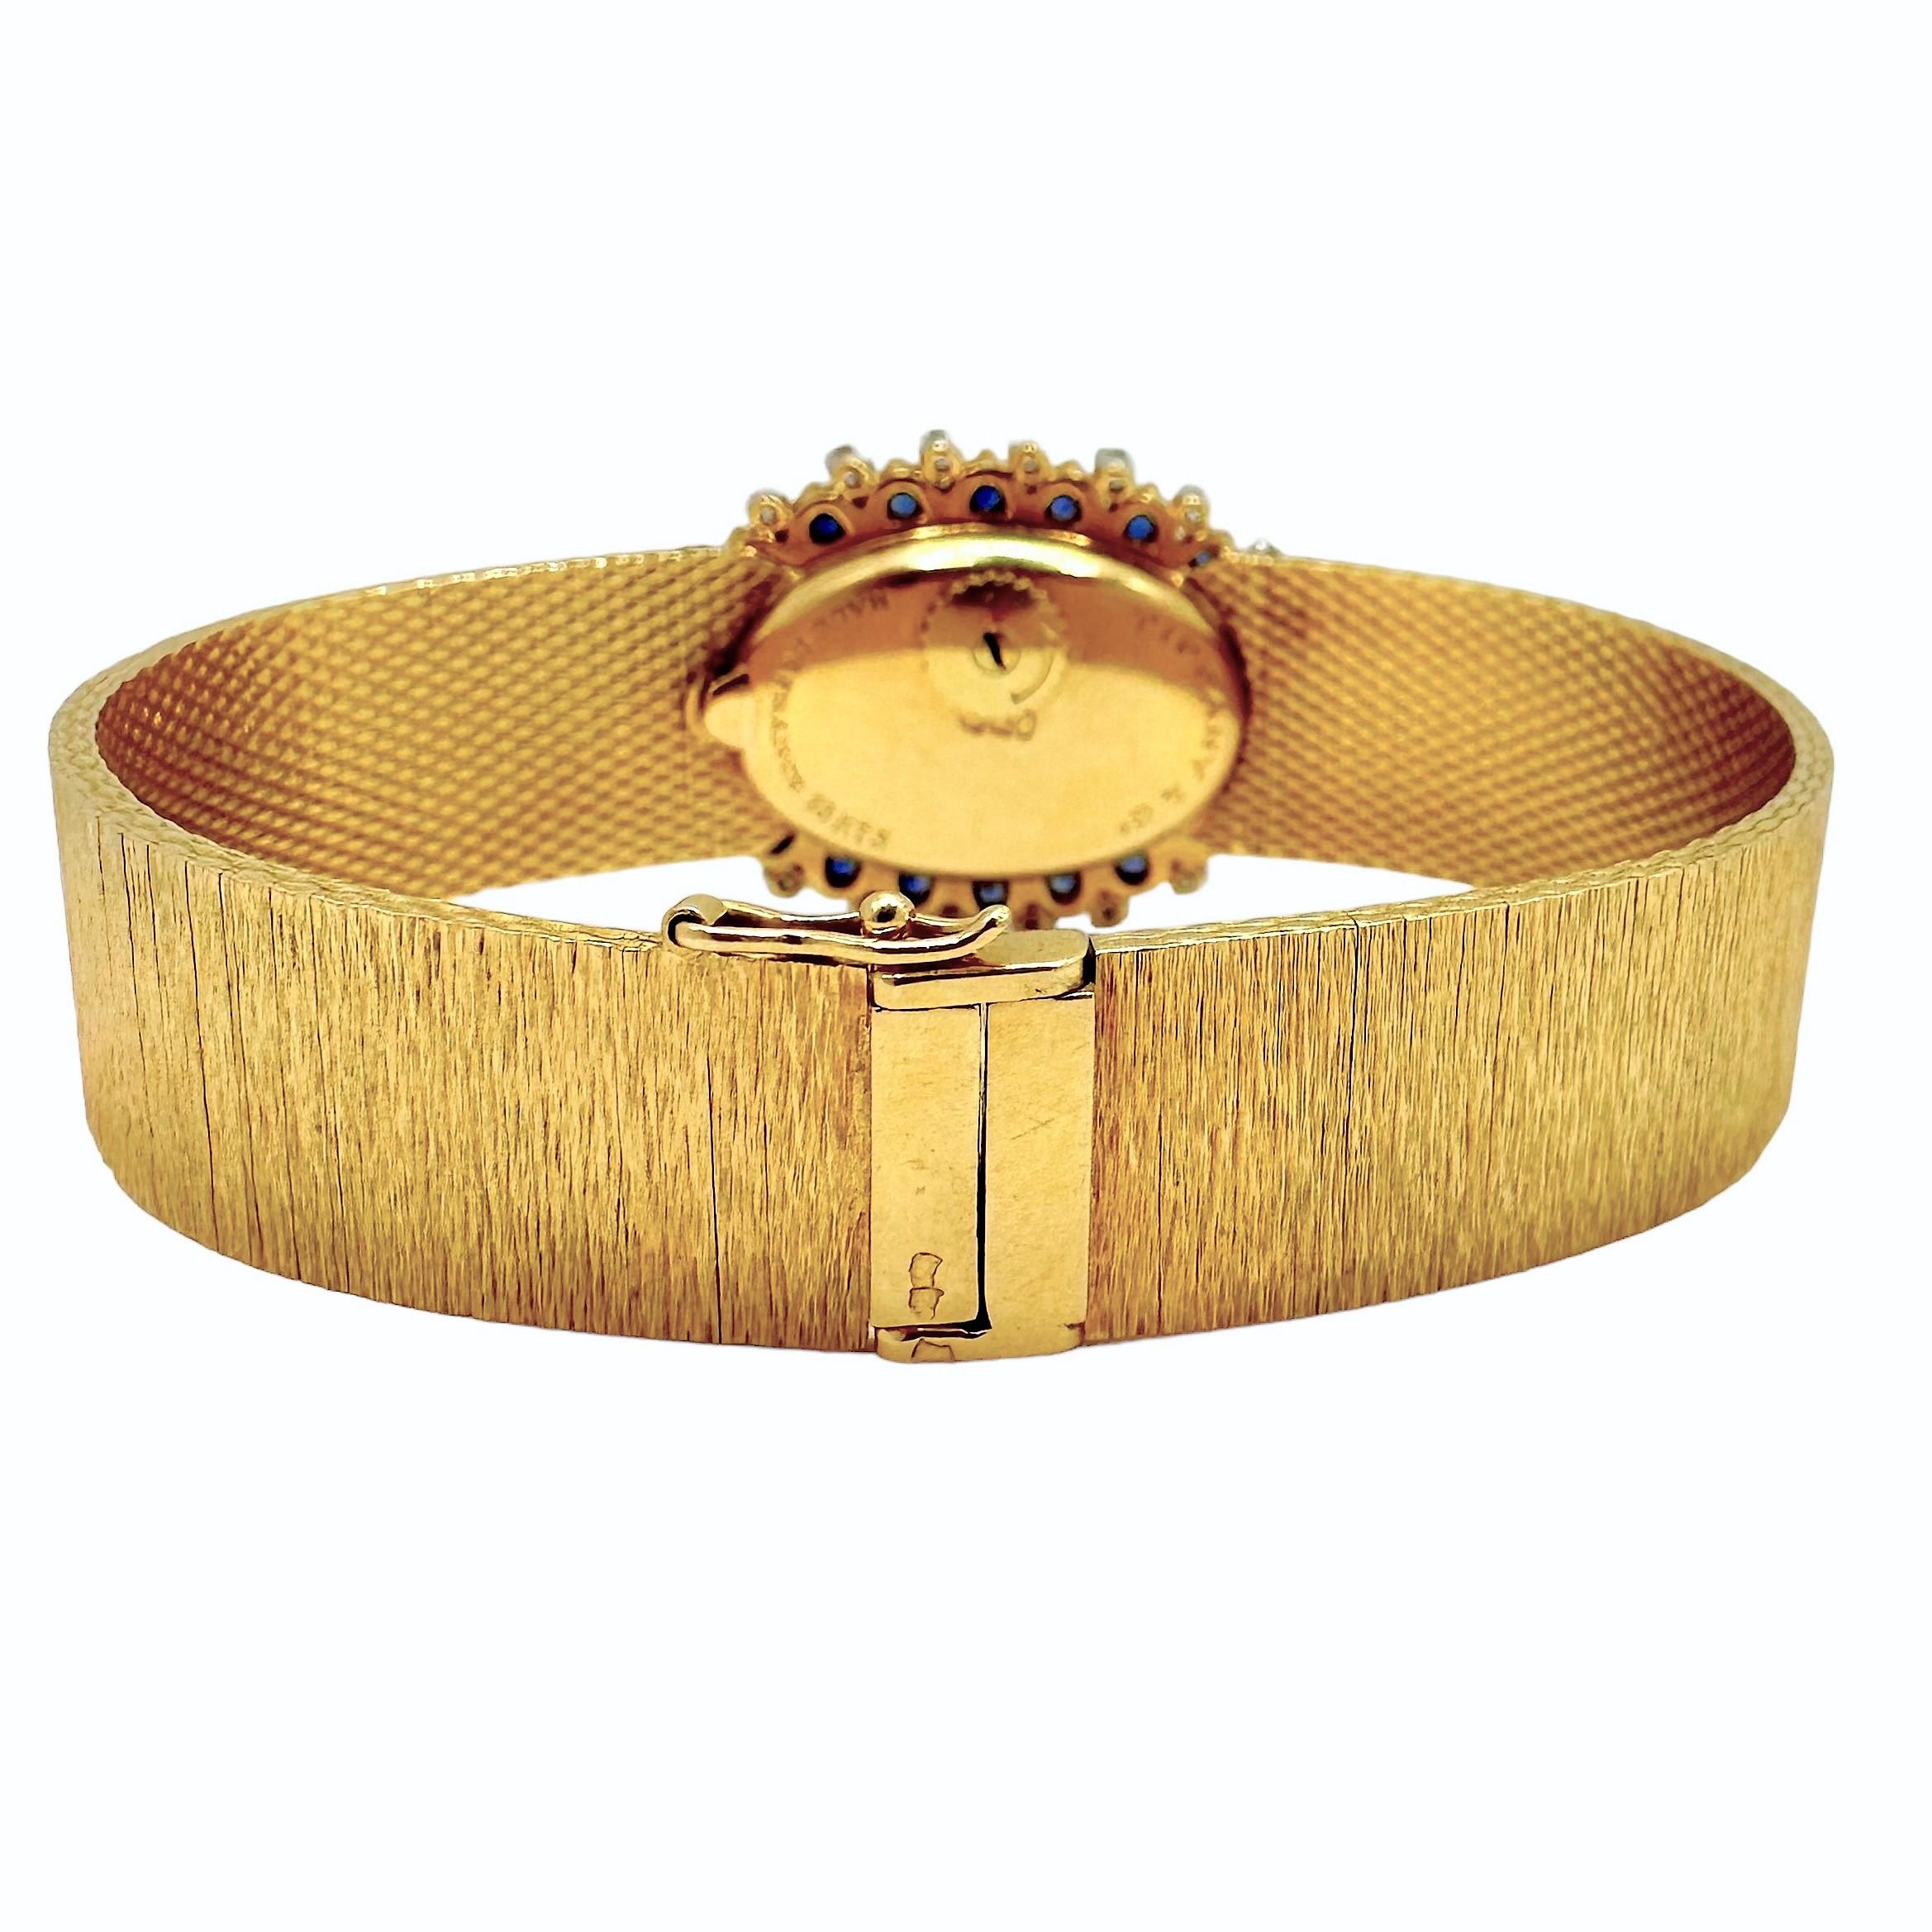 This elegant French, Tiffany ladies wristwatch with UTI movement, is crafted in luxurious 18K yellow gold and is bark finished over it's entire surface, including it's oval dial, which is signed Tiffany & Co. France. Surrounding the dial is a row of